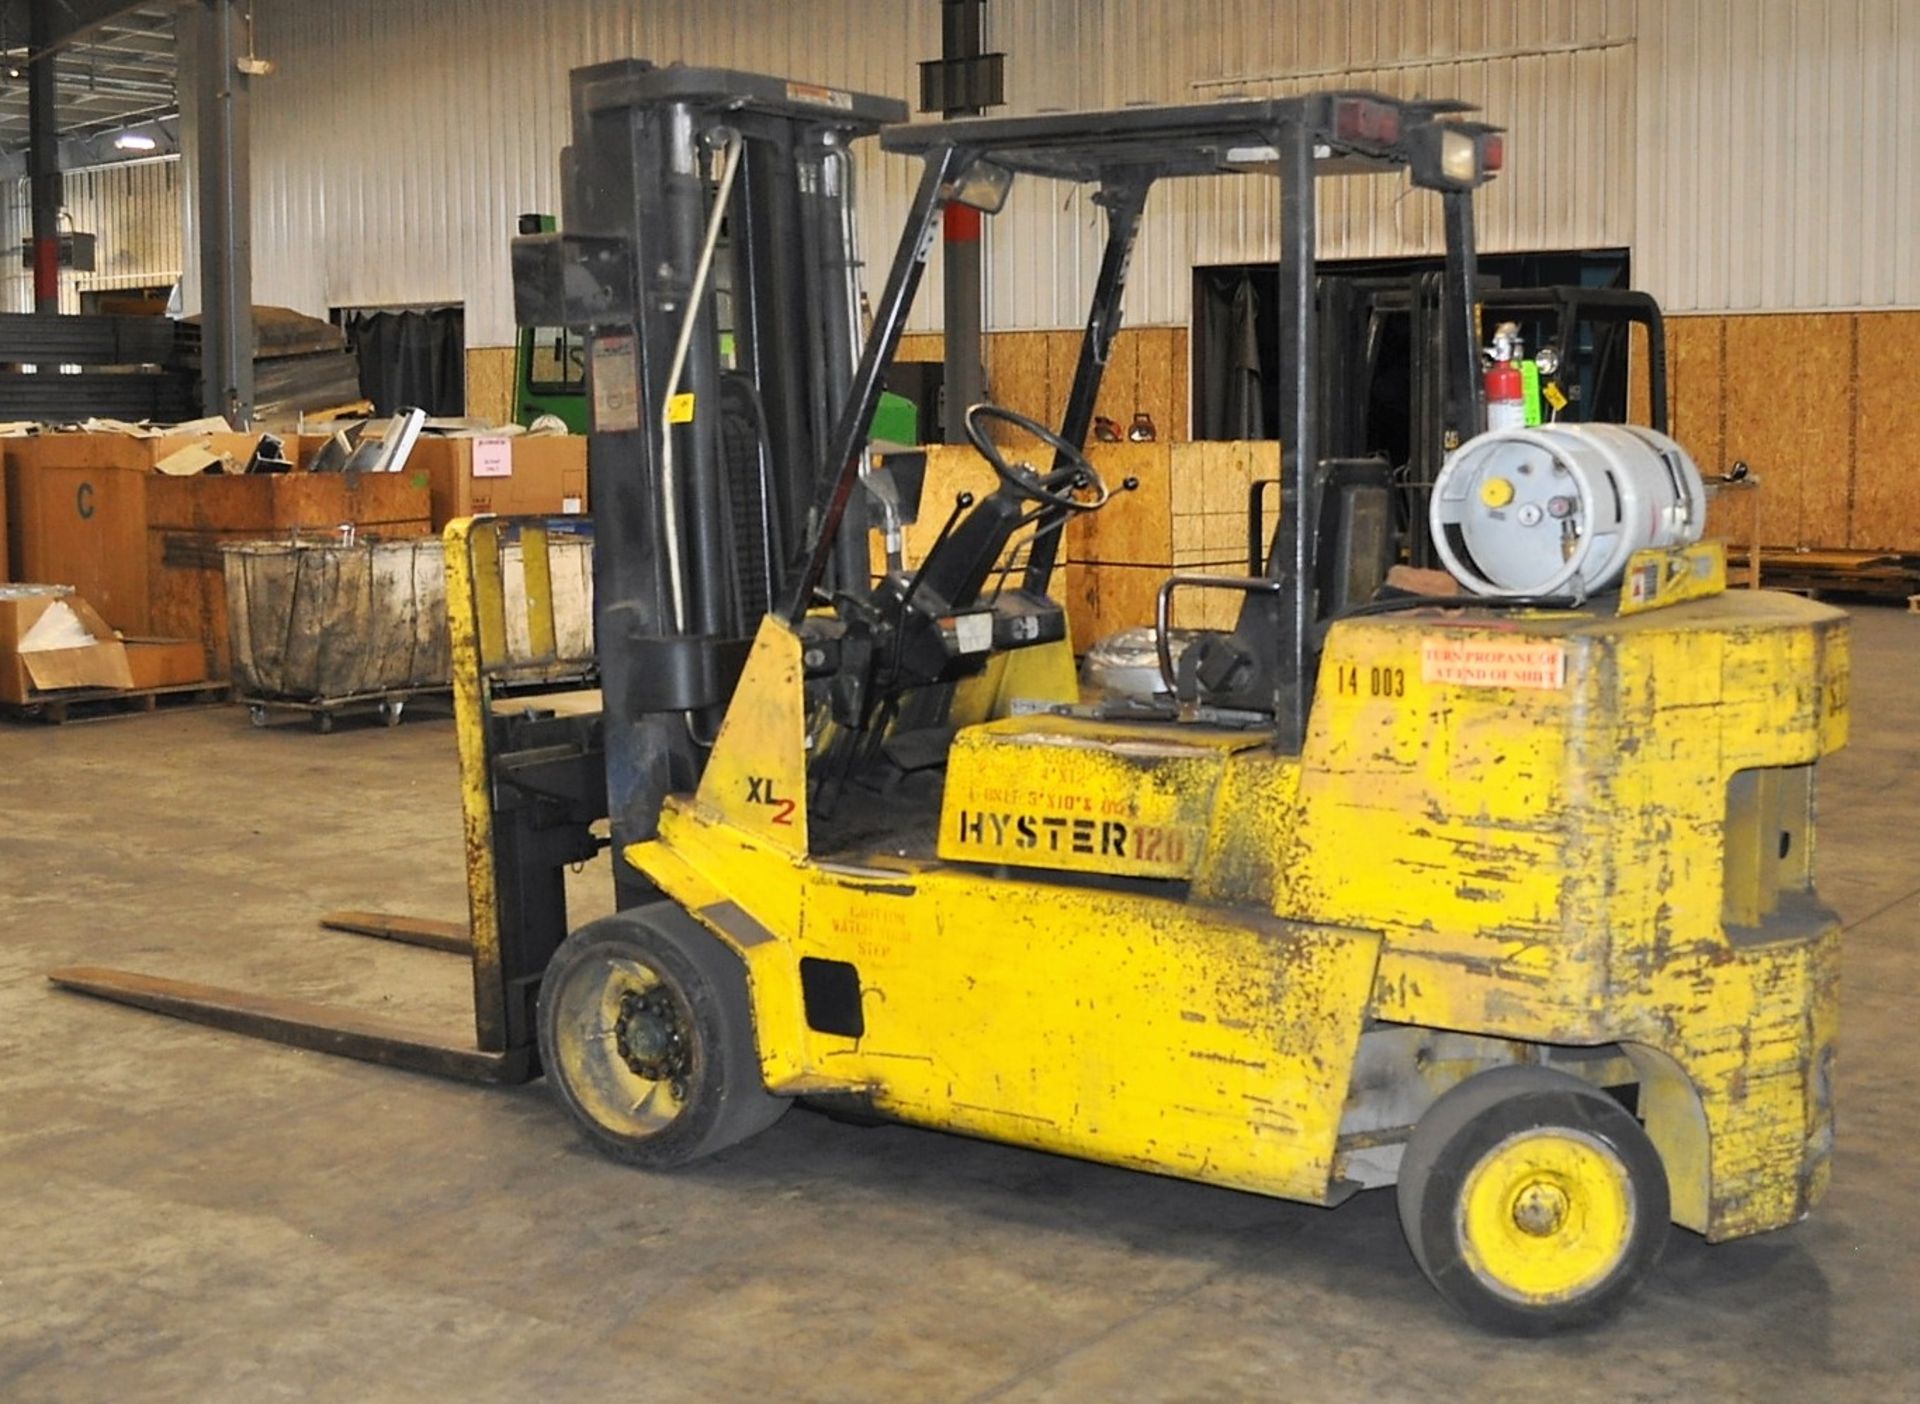 HYSTER MDL. S120XLS 11,700# CAPACITY PROPANE FORKLIFT TRUCK, WITH 184" LIFT, SOLID TIRES, SIDE - Image 2 of 5